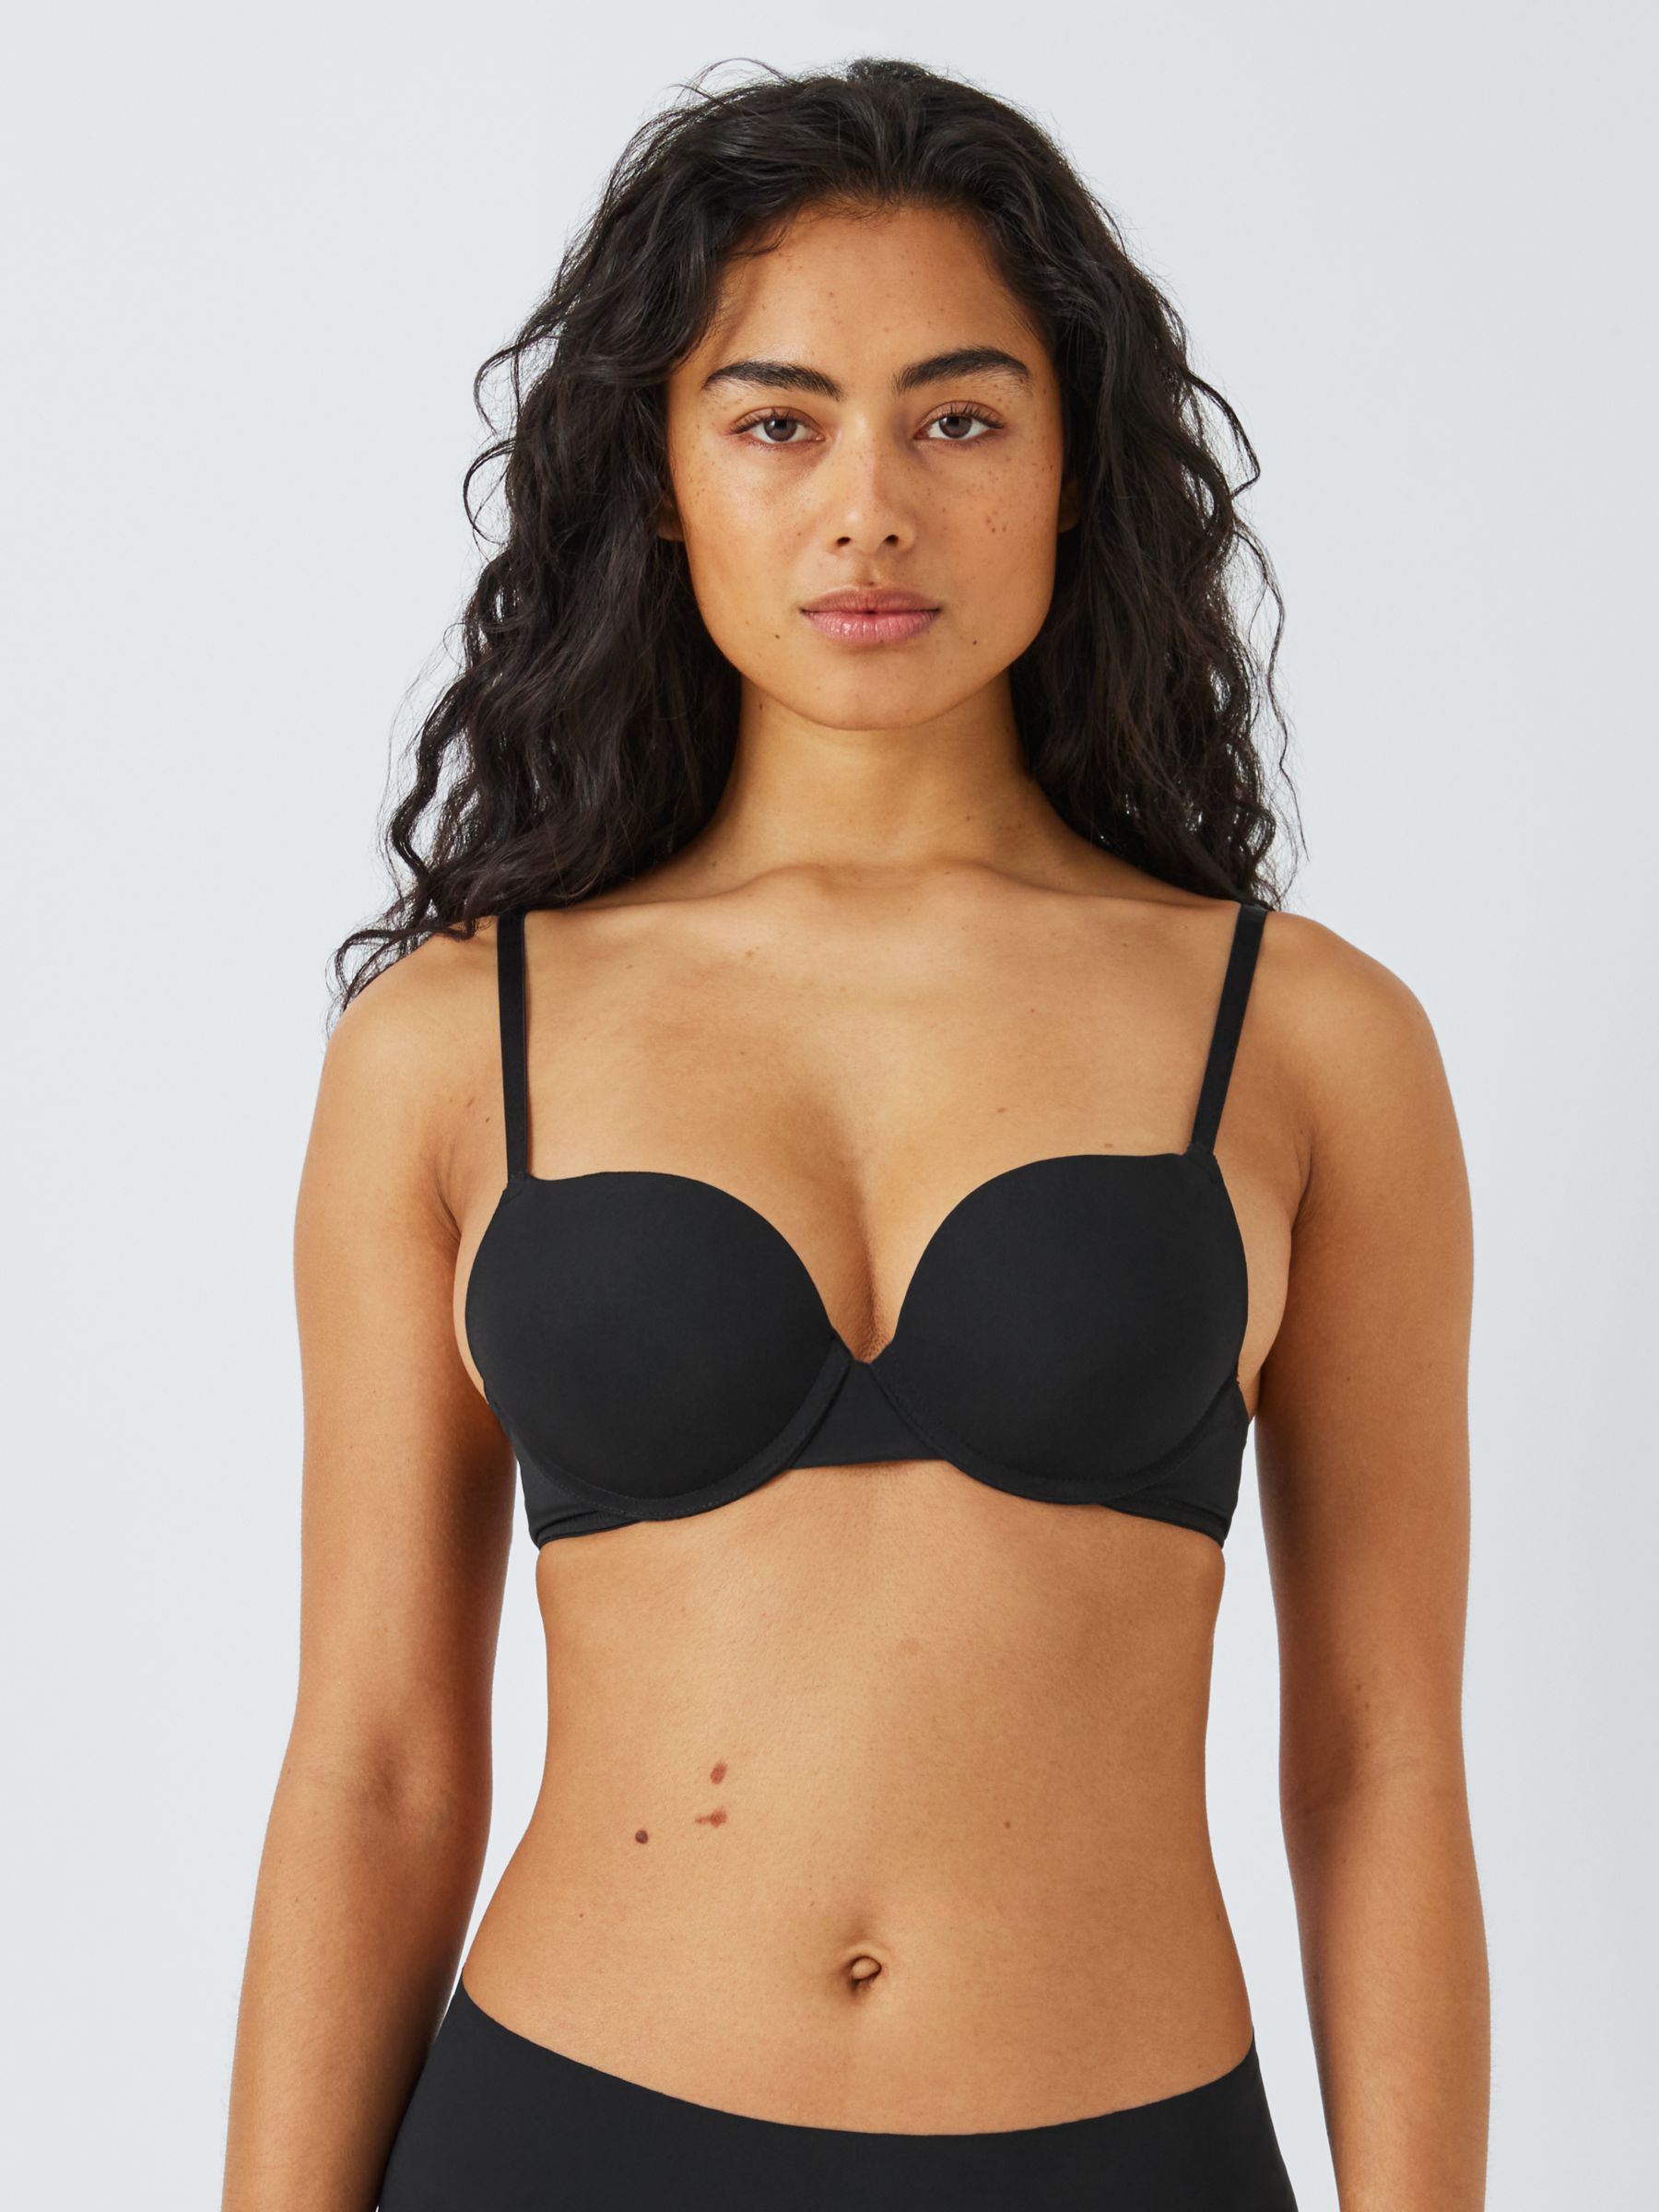 To tell you never to buy a bra online from John Lewis EVER AGAIN???